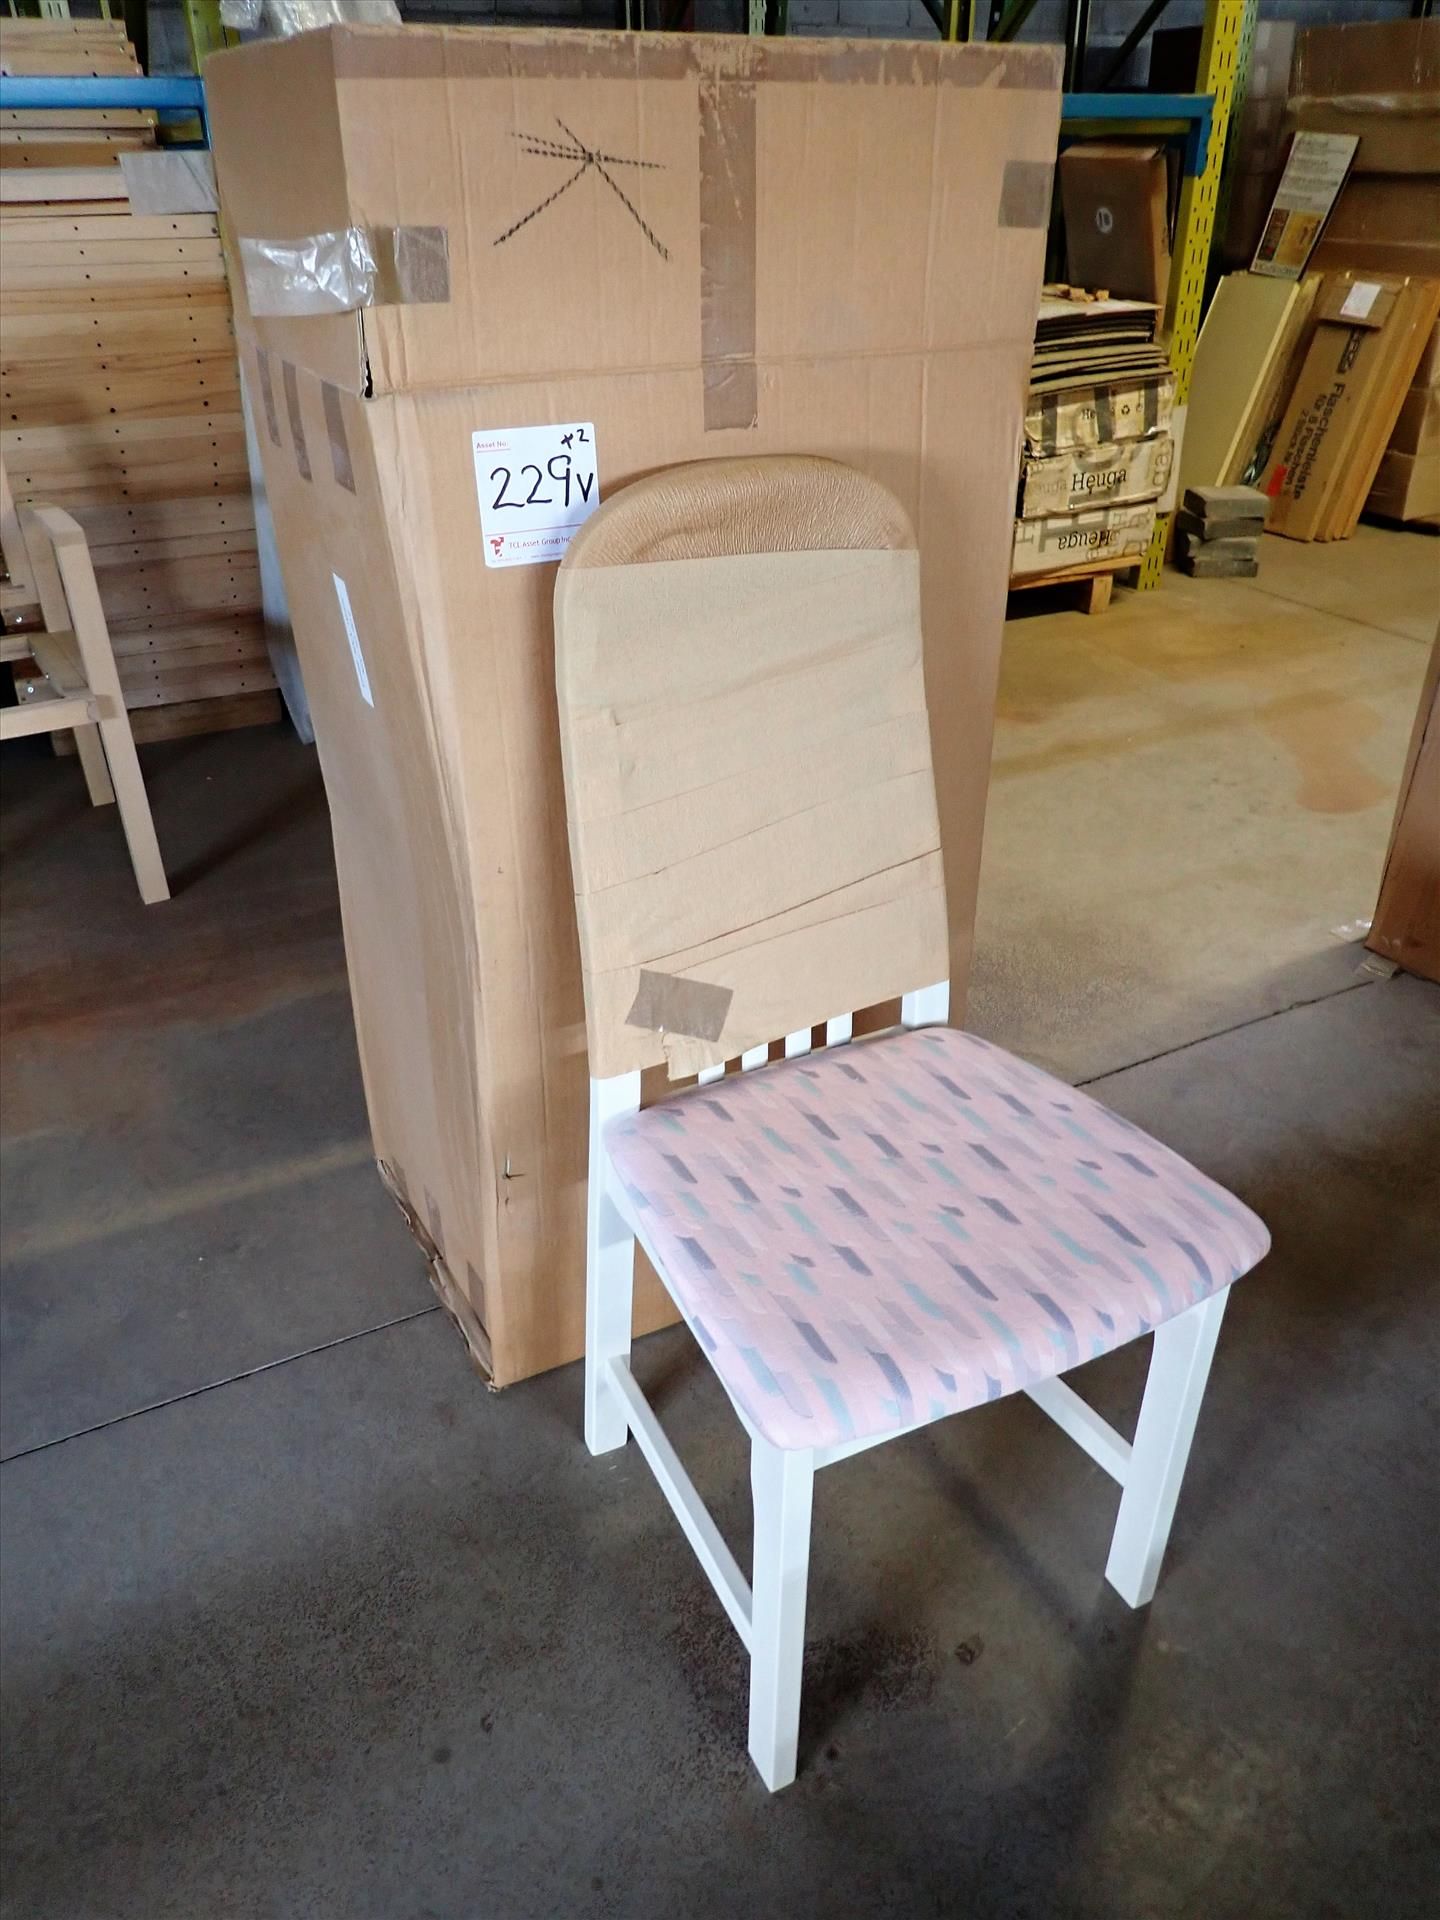 (2) Koln dinning chairs (NEW in box), white lacquered finish, pink seat cushions, stain-resistant